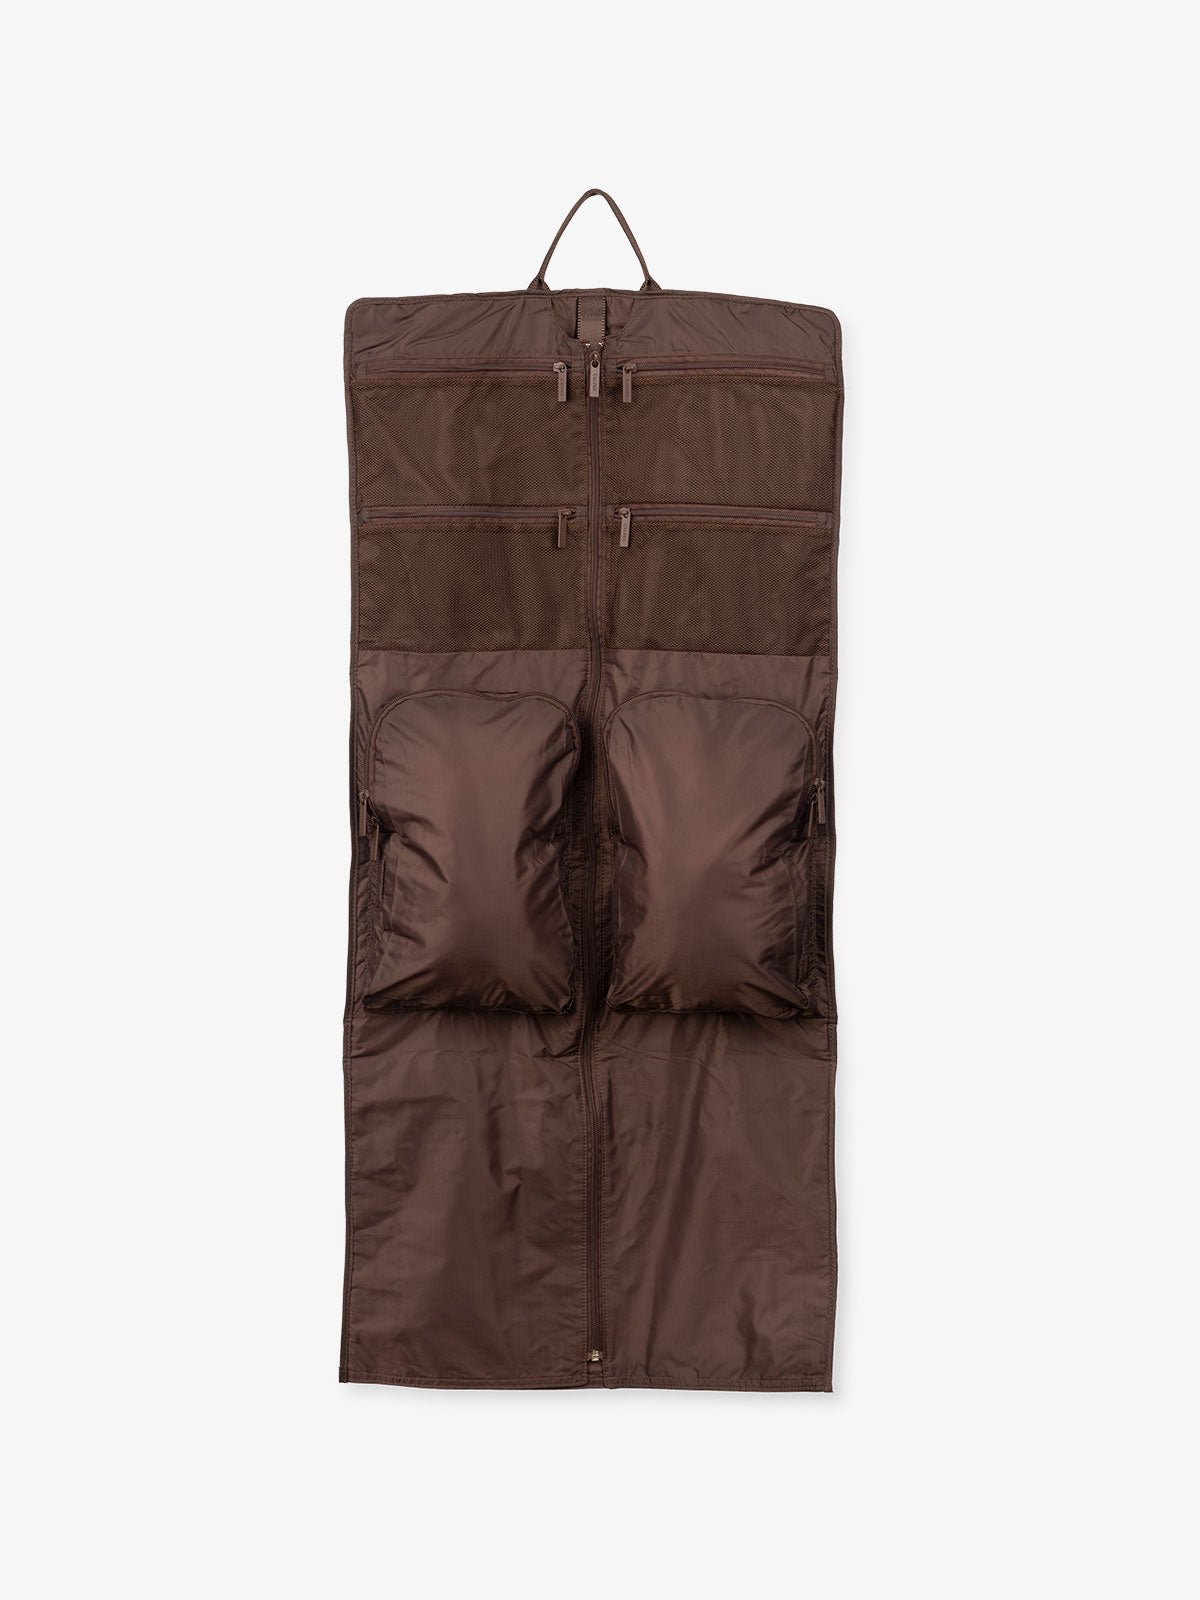 CALPAK Compakt small carry on garment bag made with water resistant ripstop nylon and multiple pockets in walnut